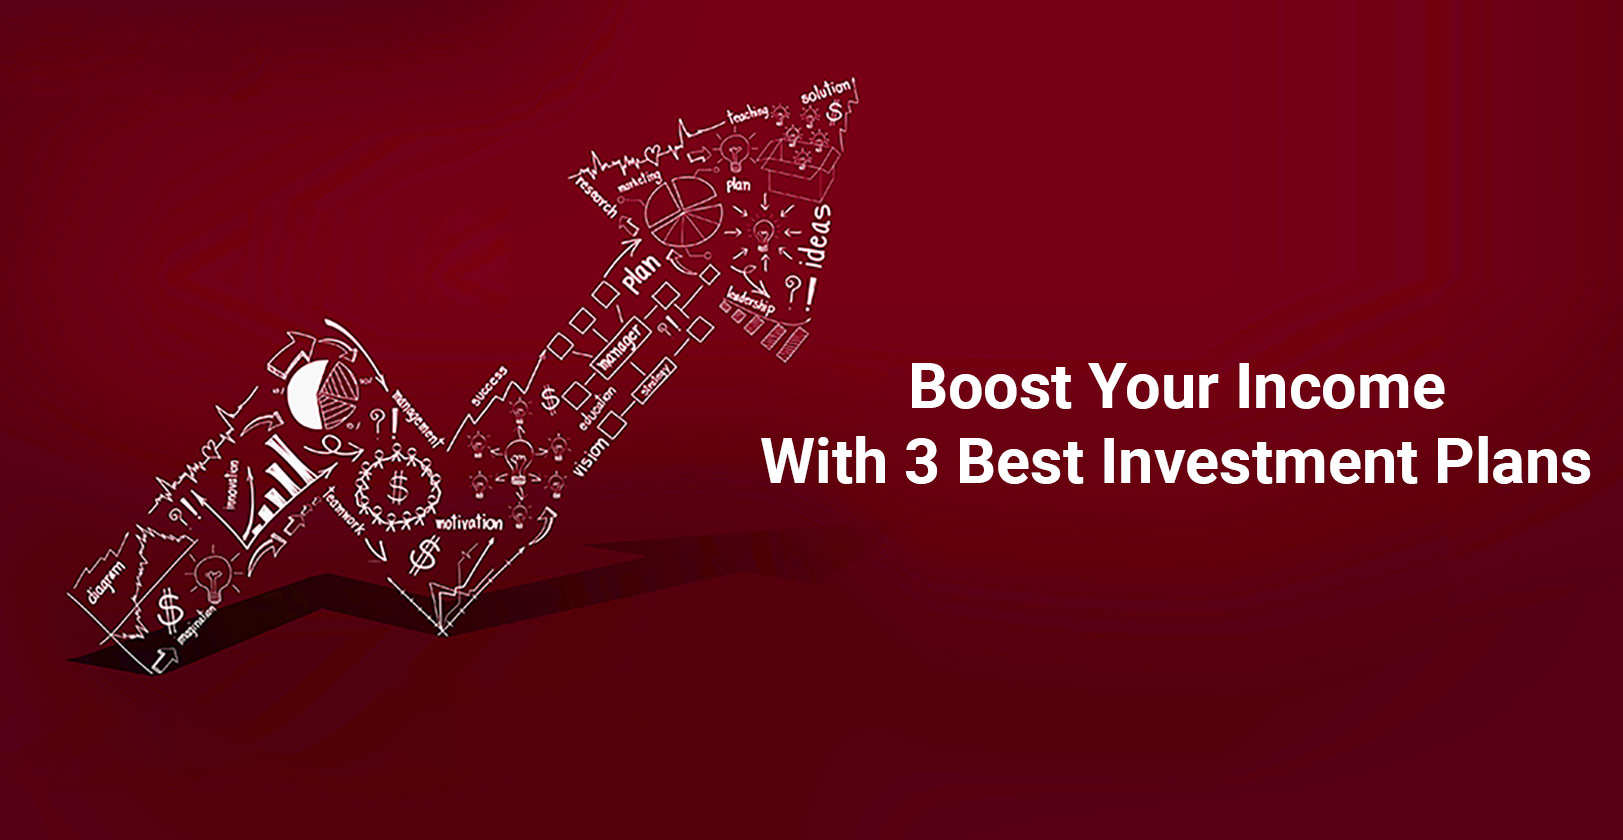 Boost Your Income With 3 Best Investment Plans